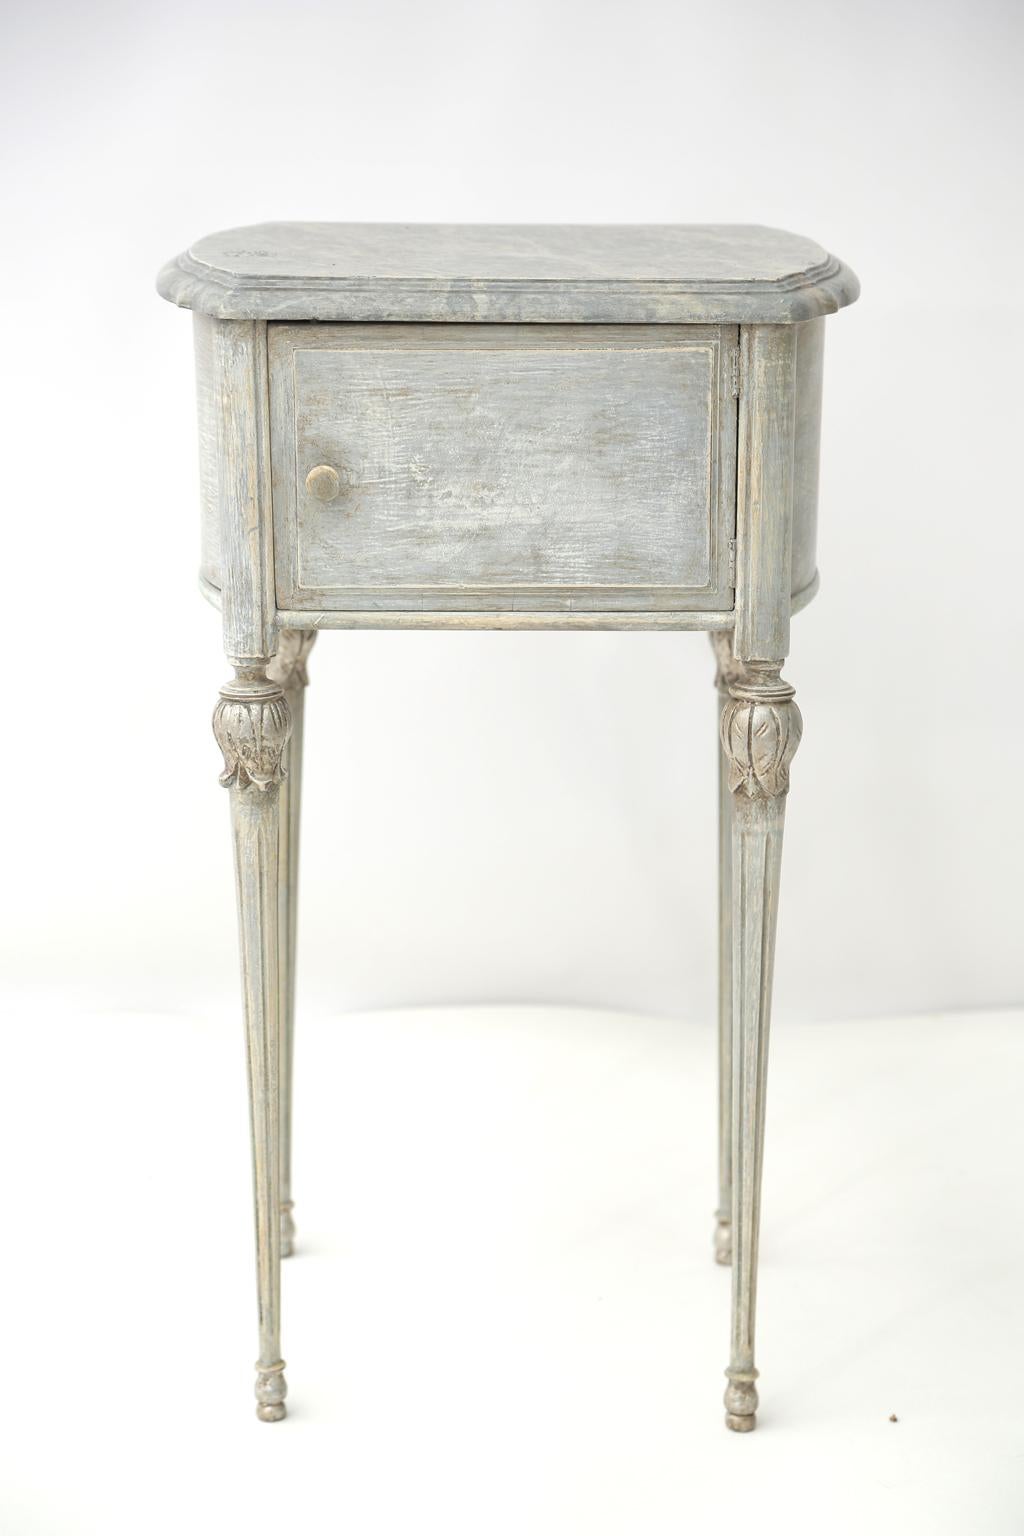 Copper Painted French Pot Stand Side Table For Sale